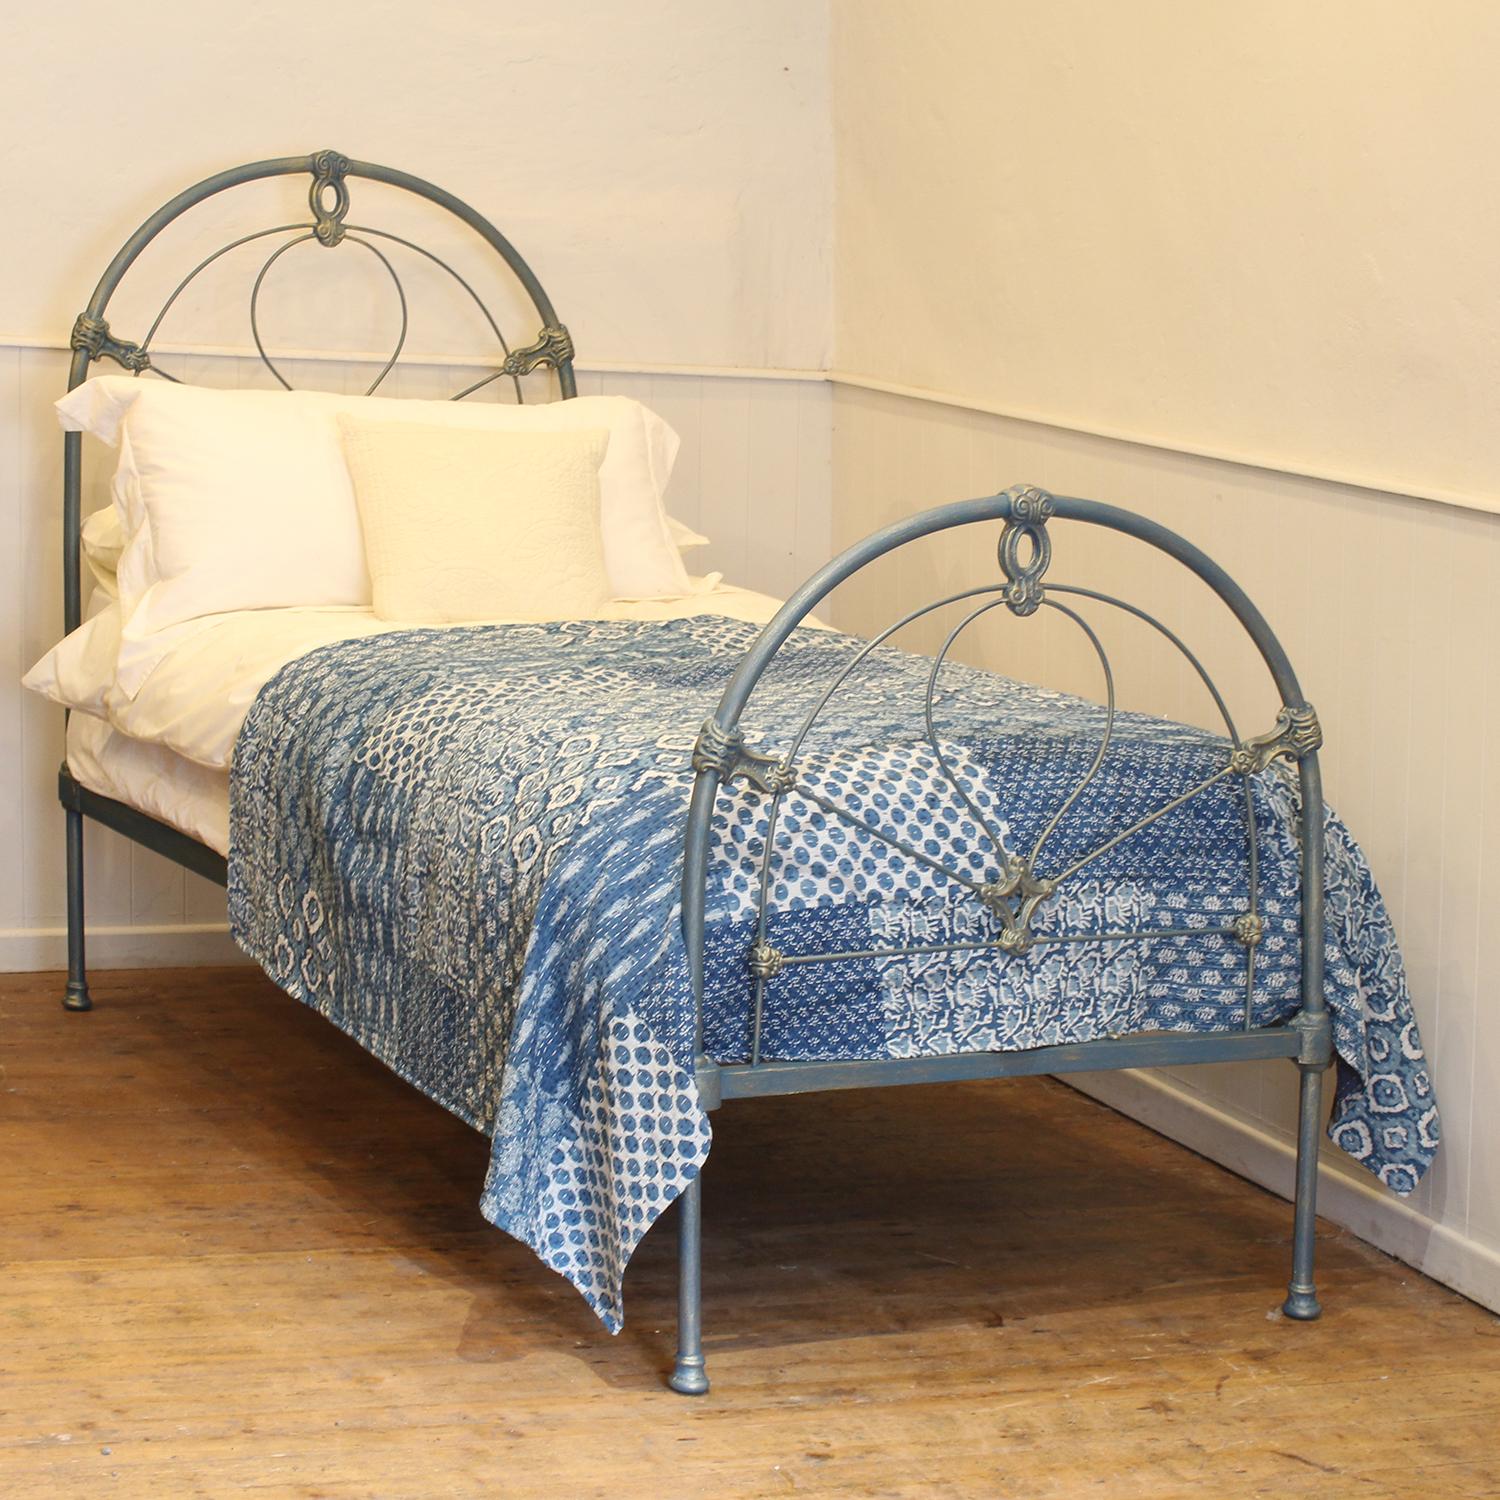 A traditional single Victorian cast iron antique bed in blue and gold and arch design.
This fine original antique bed from the late Victorian era has attractive castings, which have been accentuated by the hand-paint finish. 
This bed takes a